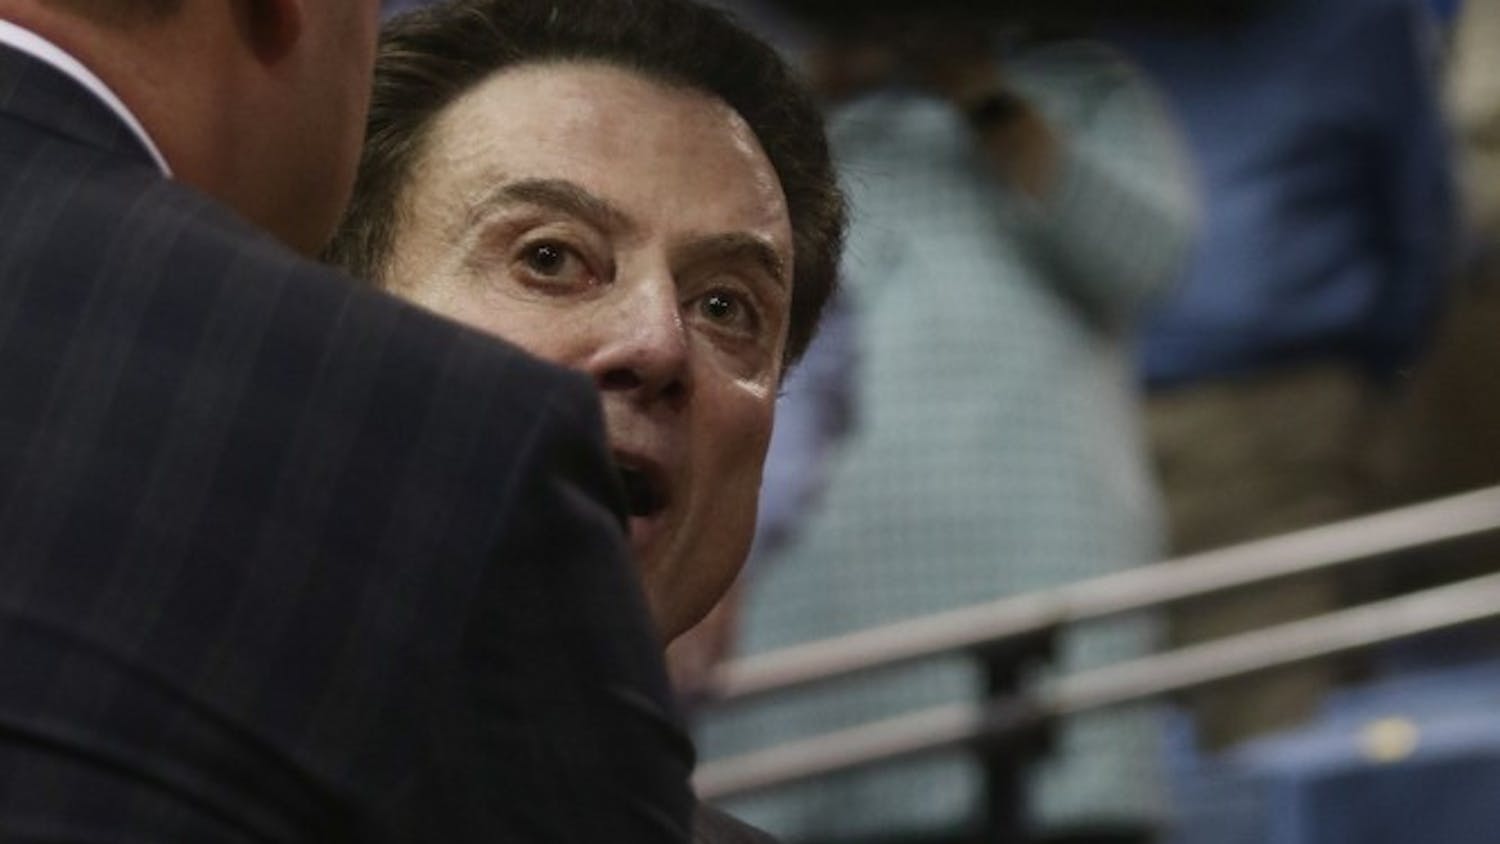 Louisville head coach Rick Pitino is held back by his assisant coaches after reacting to a North Carolina fan shouting "you suck, Rick" as the coach was walking into the locker room at halftime.